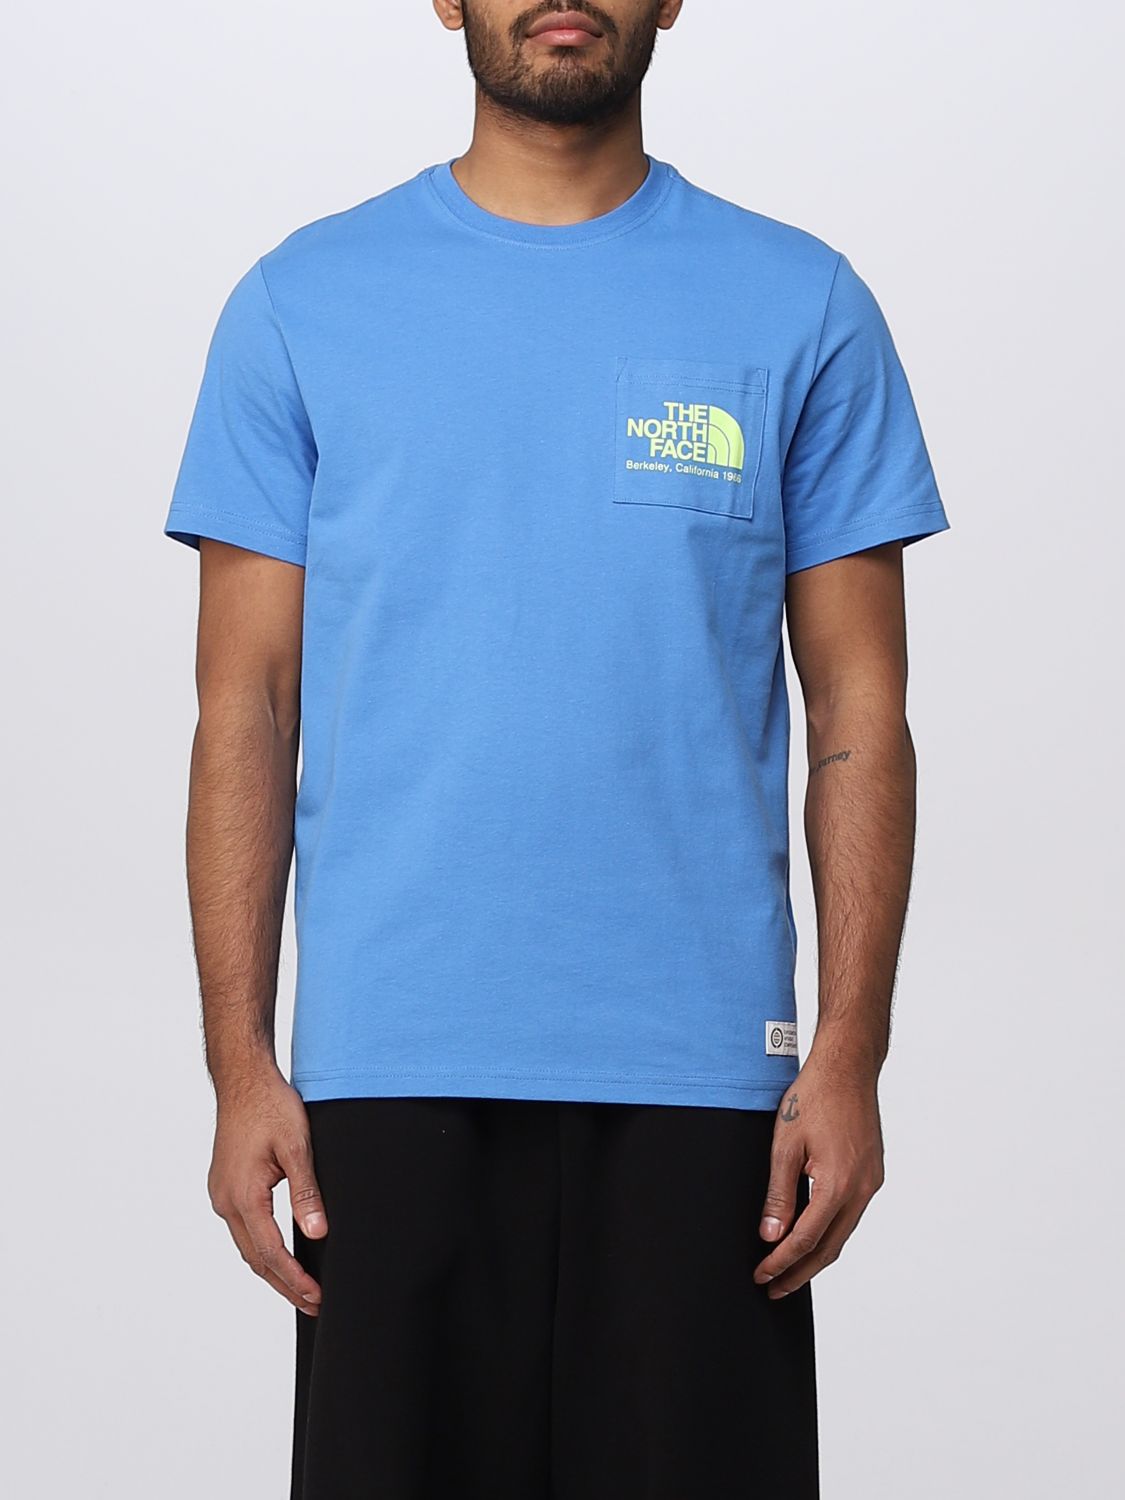 The North Face T-shirt  Men Color Turquoise